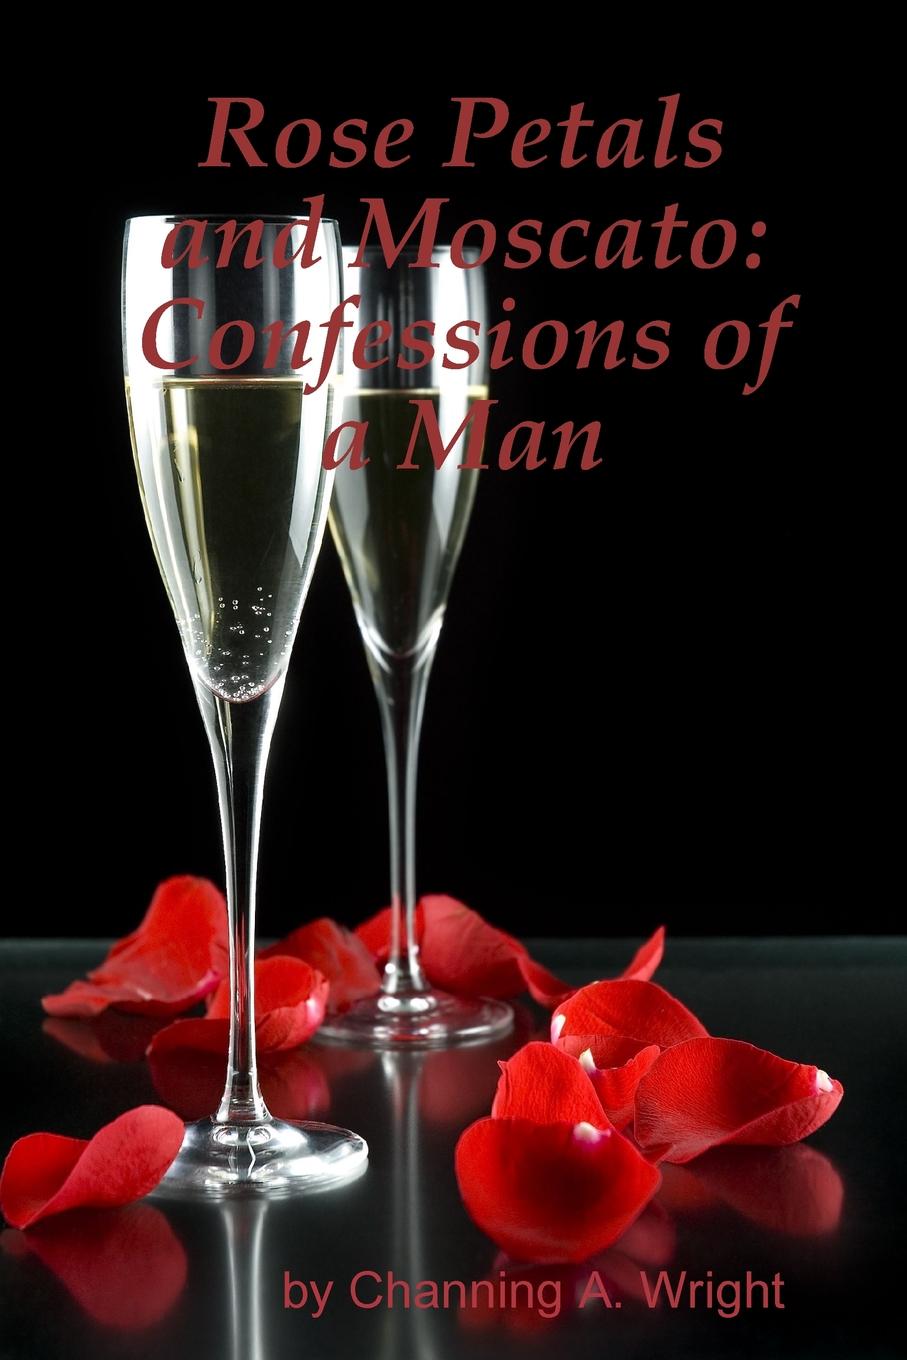 Channing A. Wright Rose Petals and Moscato. Confessions of a Man